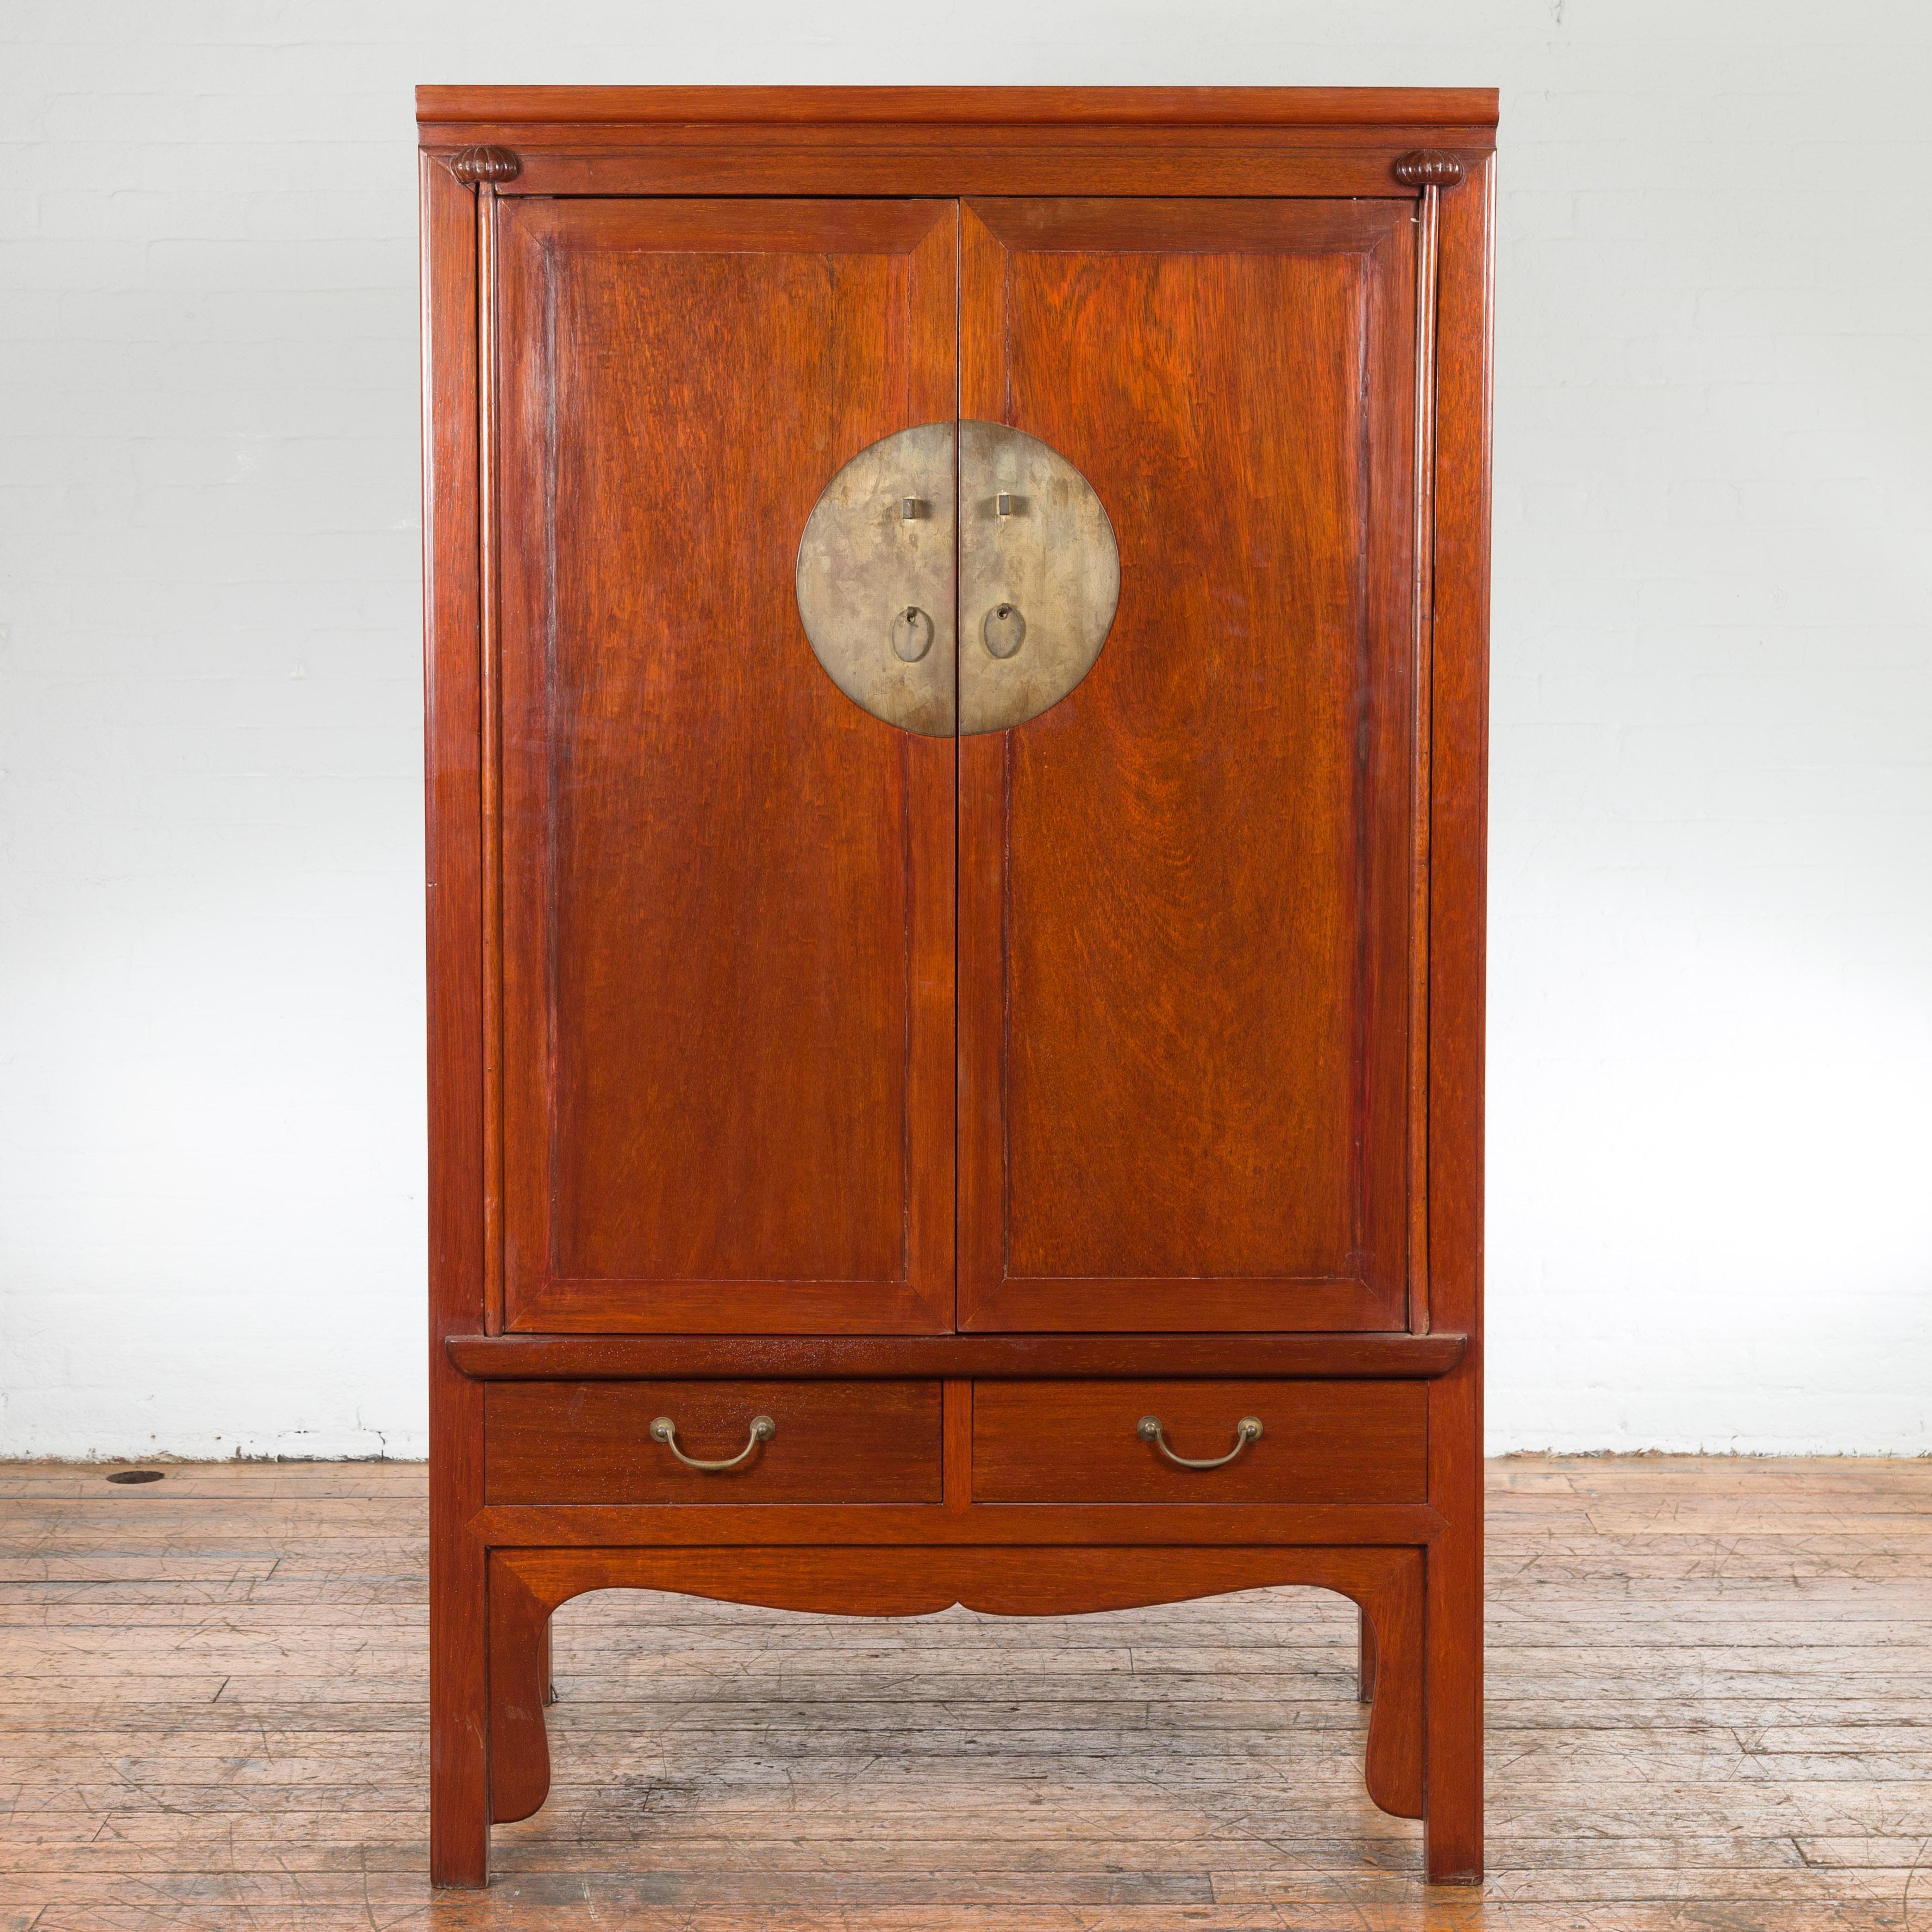 A Chinese Qing Dynasty period brown armoire from the 19th century, with brass round medallion, reconfigured pocket doors, two drawers and carved apron. Created in China during the Qing Dynasty period in the 19th century, this armoire features a